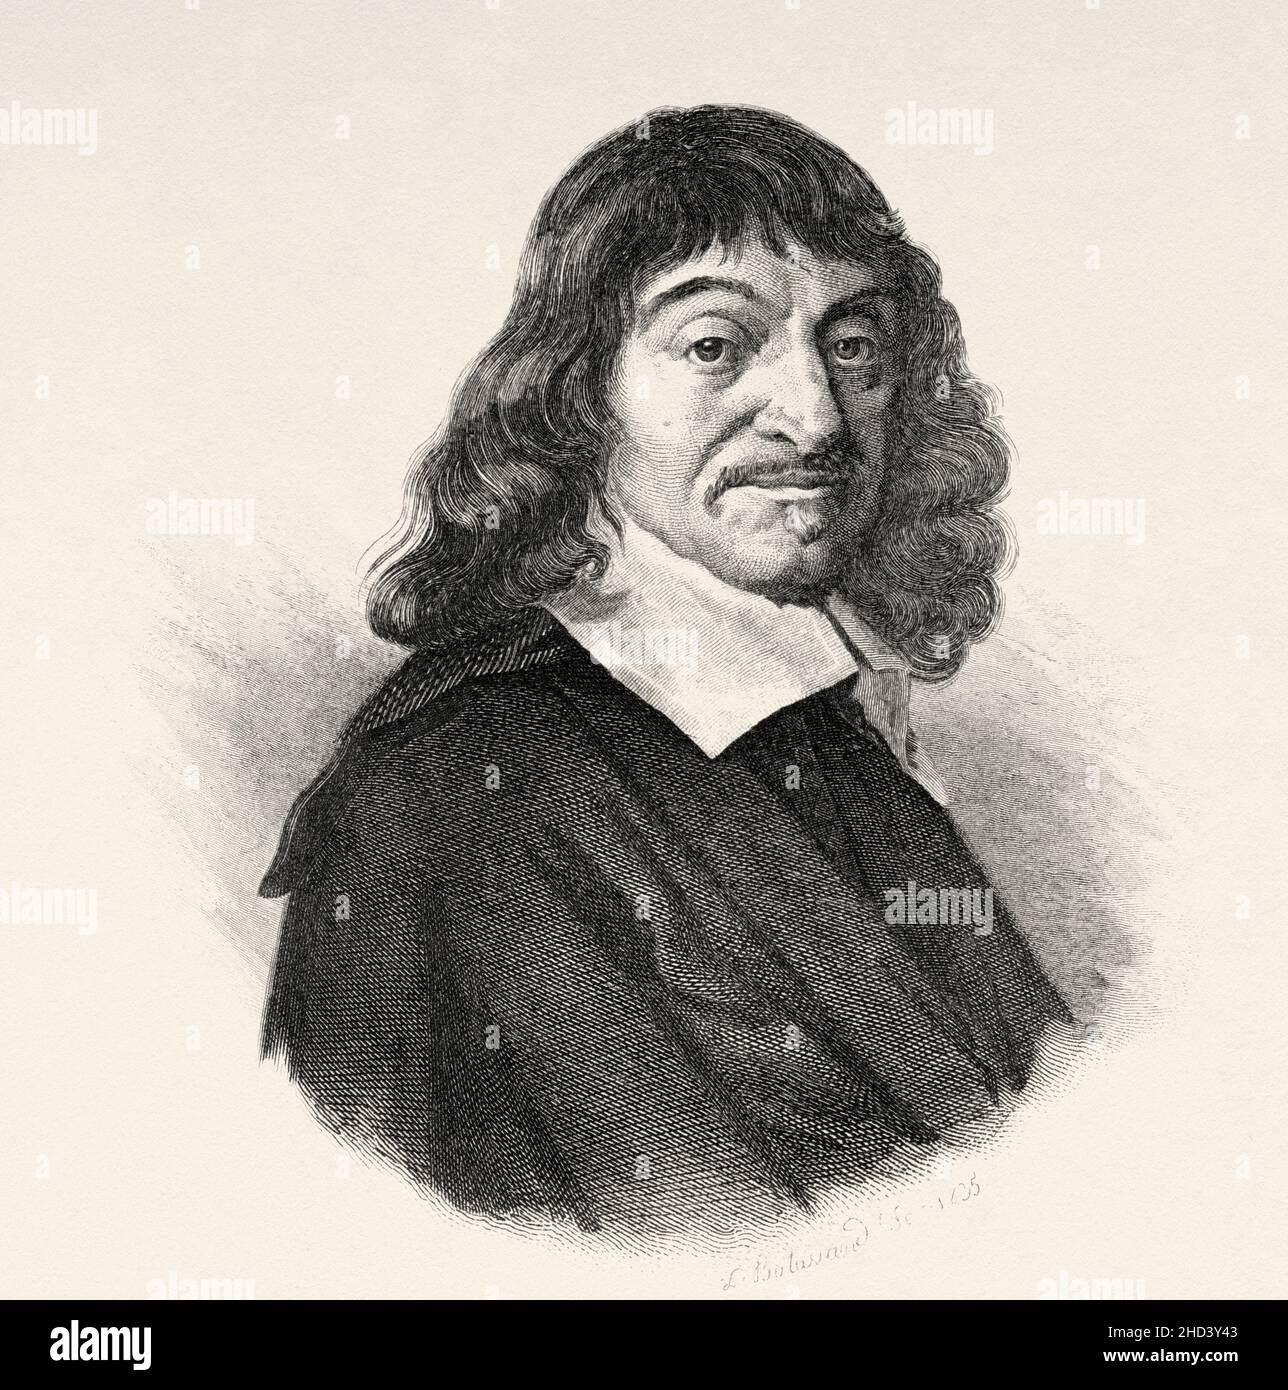 René Descartes (1596-1650 ) was a French philosopher, mathematician, and scientist who invented analytic geometry, linking the previously separate fields of geometry and algebra. France. Europe. Old 19th century engraved illustration from Portraits et histoire des hommes utile by Societe Montyon et Franklin 1837 Stock Photo